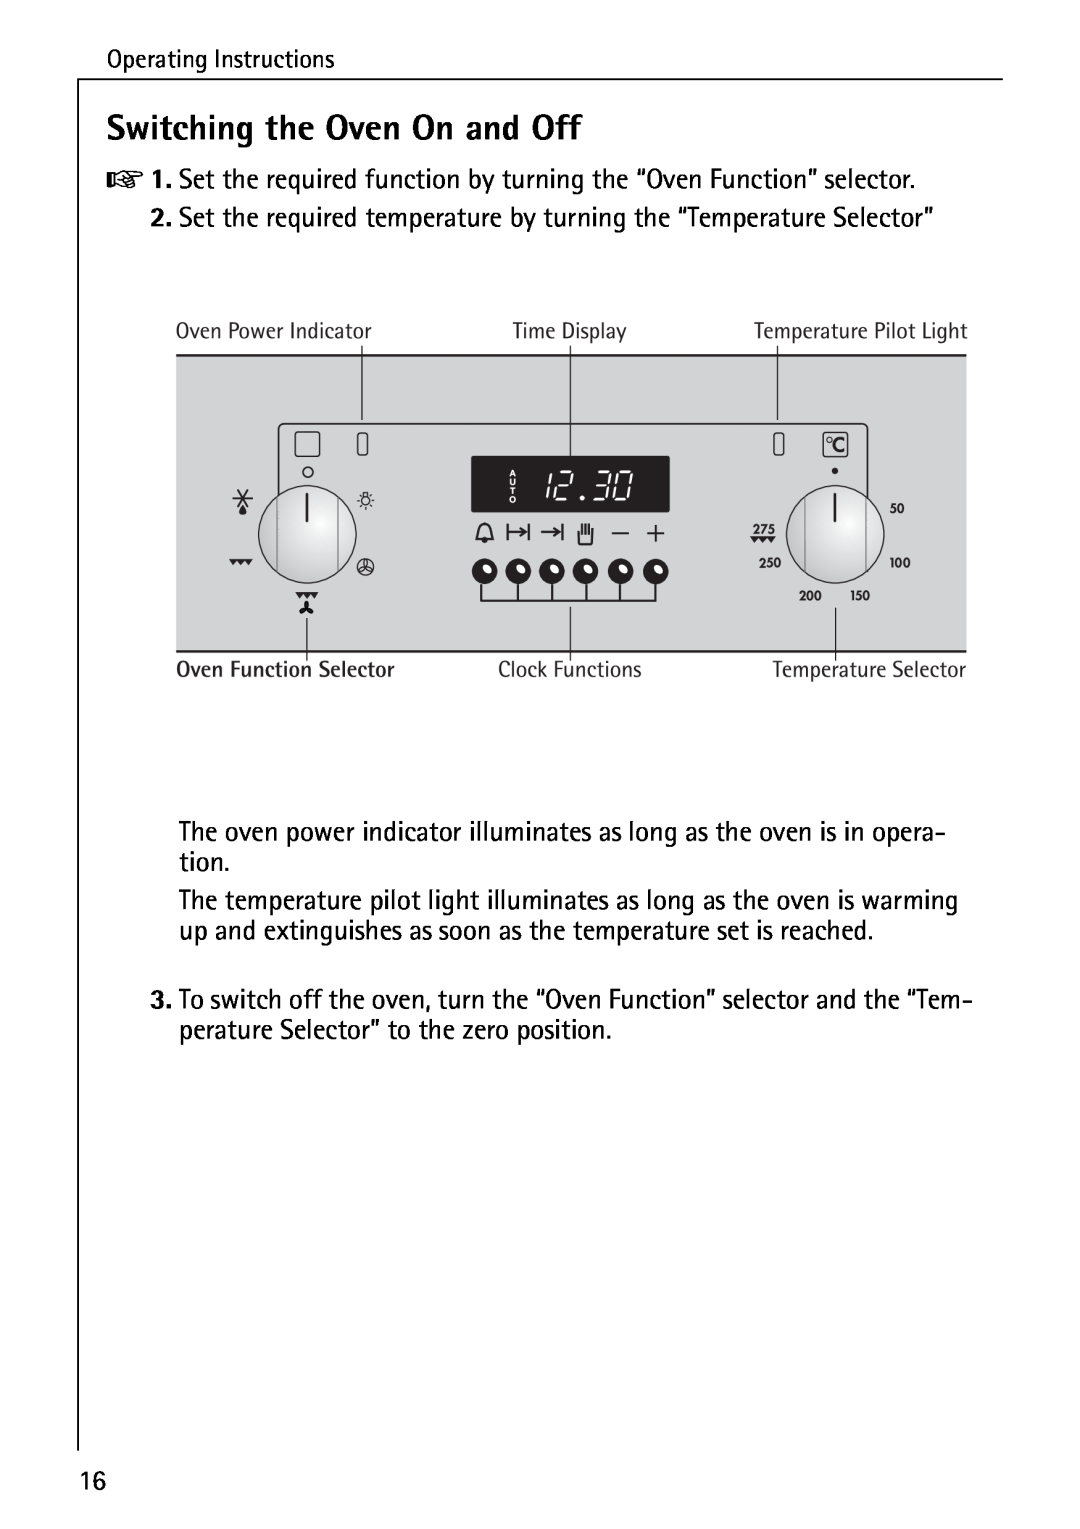 AEG B 2100 operating instructions Switching the Oven On and Off 